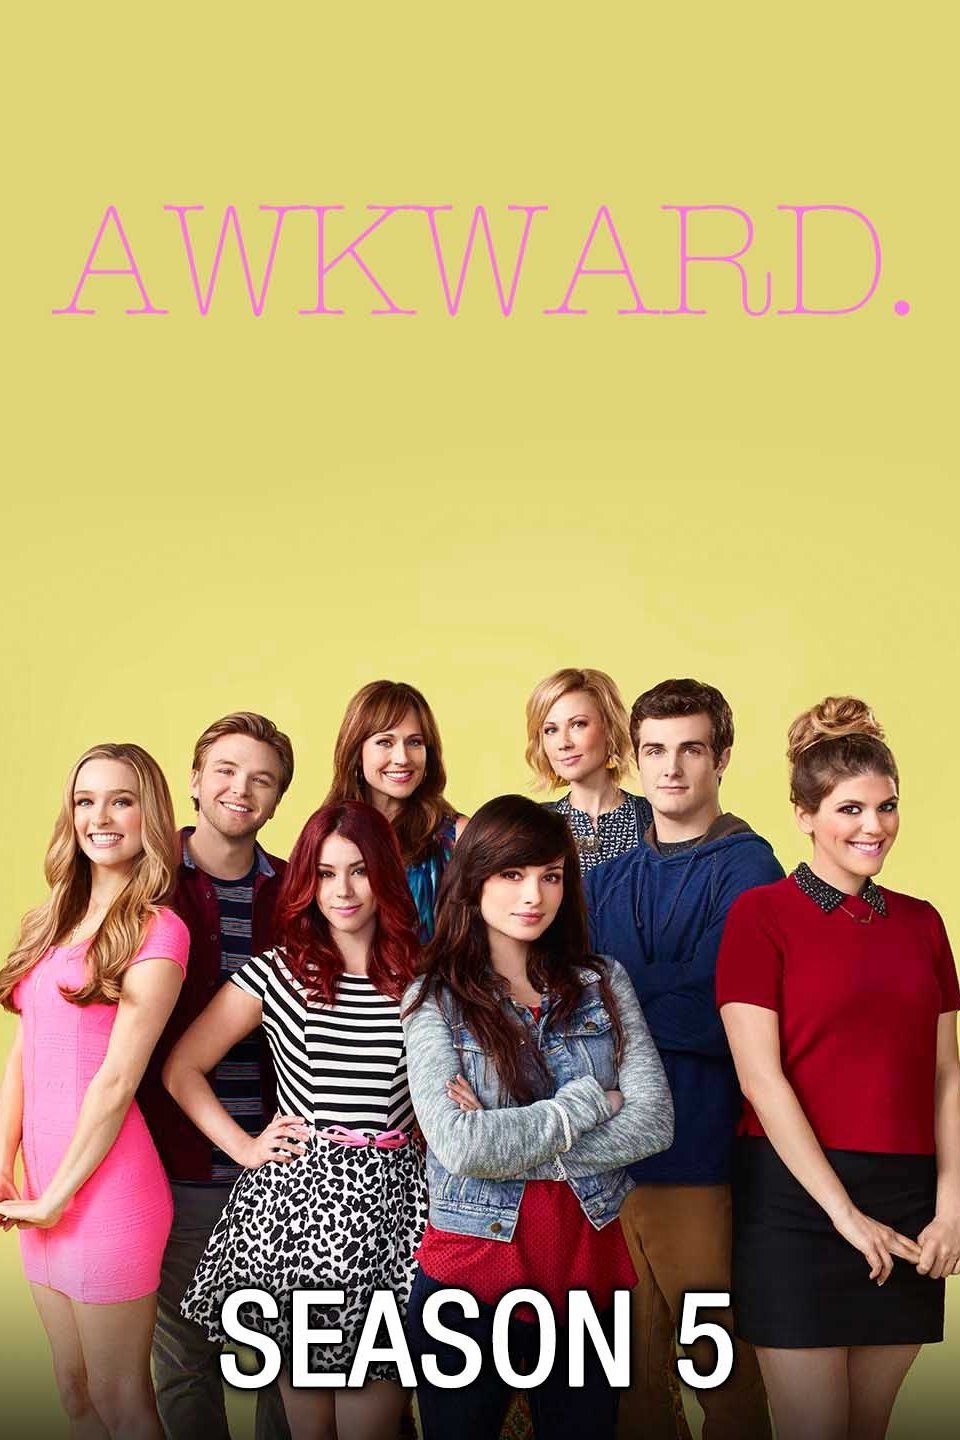 Will there be a season 6 of awkward